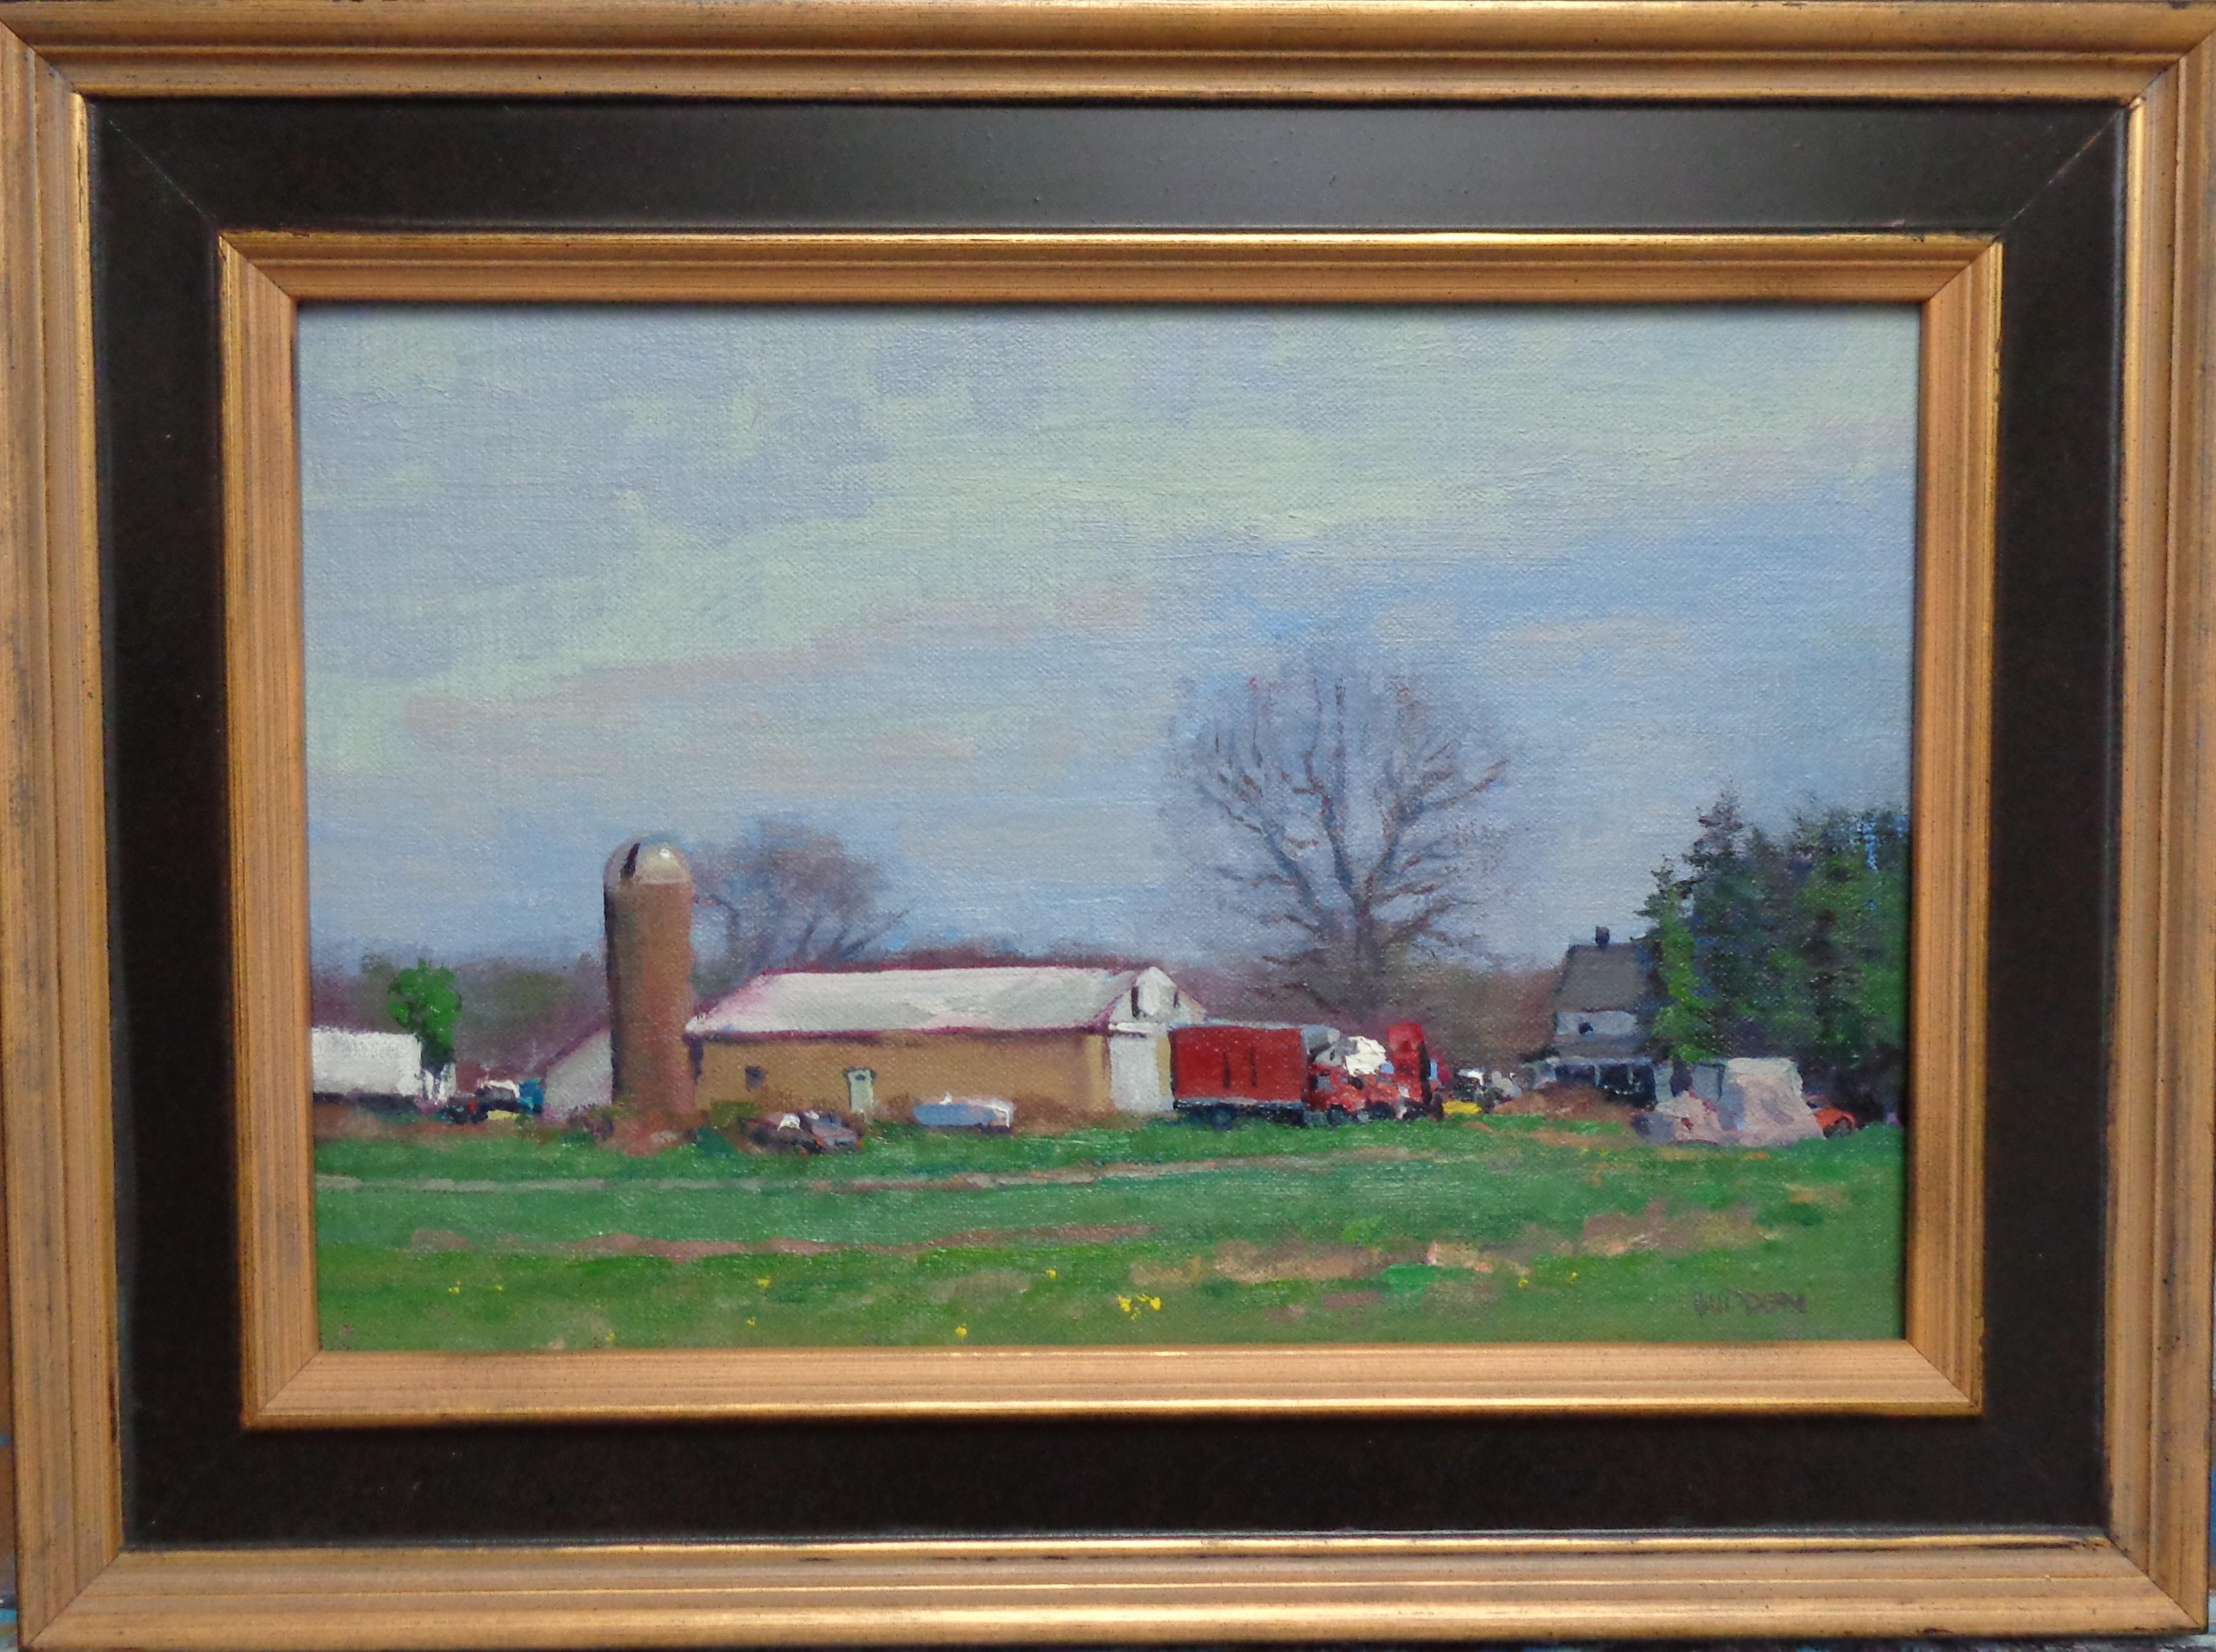 Farm Scene is an impressionistic landscape plein air oil painting that I did on location near my studio in 2020 The painting is on a canvas panel and exudes the rich qualities of oil paint with bright strong color, a variety of lost and found edges,